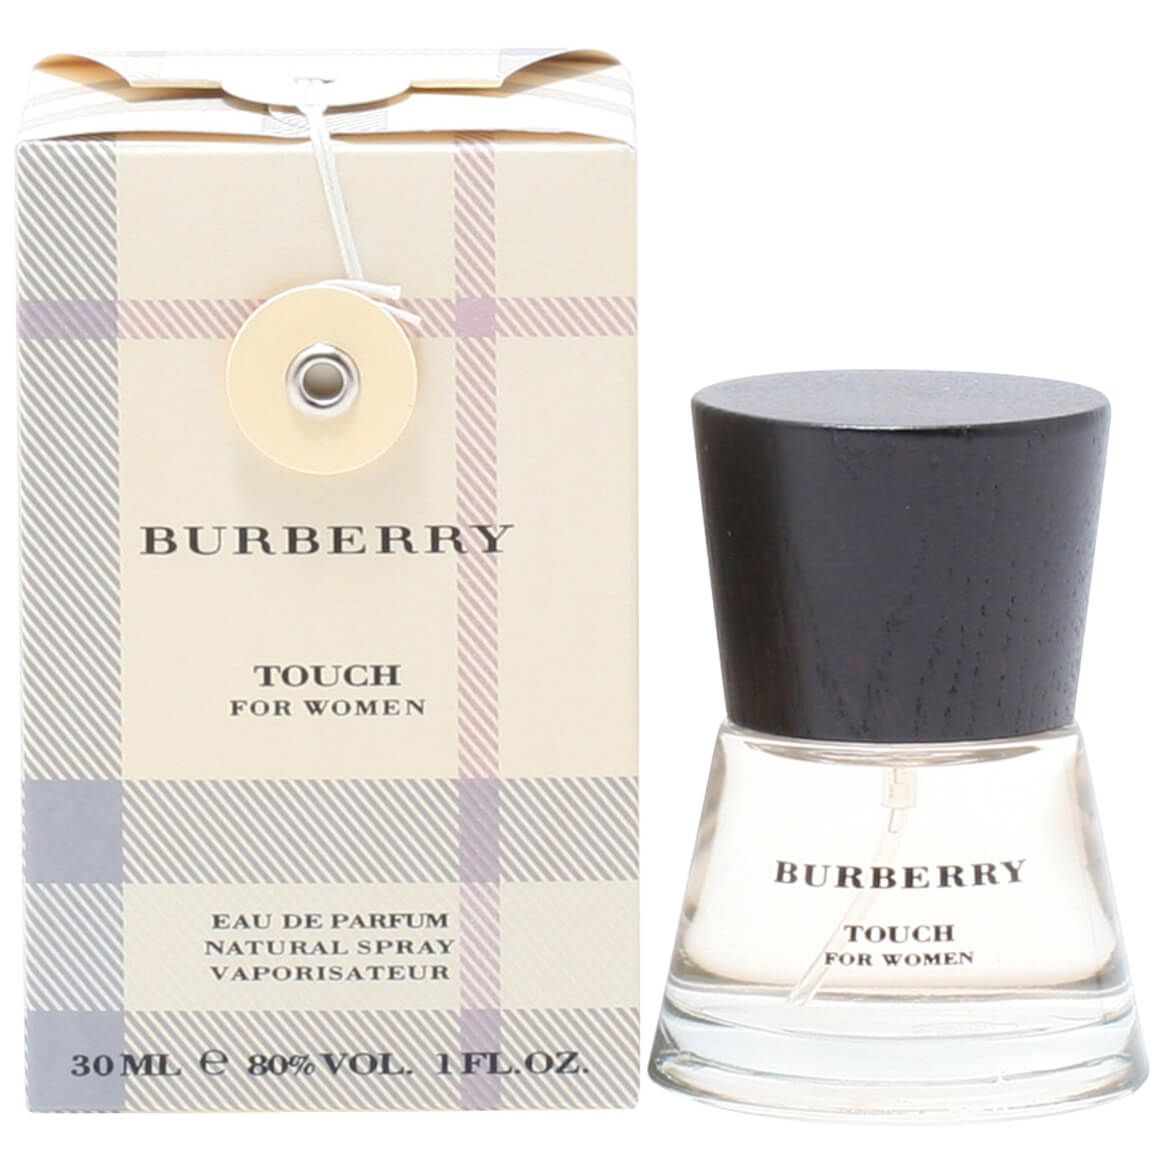 Burberry Touch for Women EDP, 1 oz. + '-' + 366805